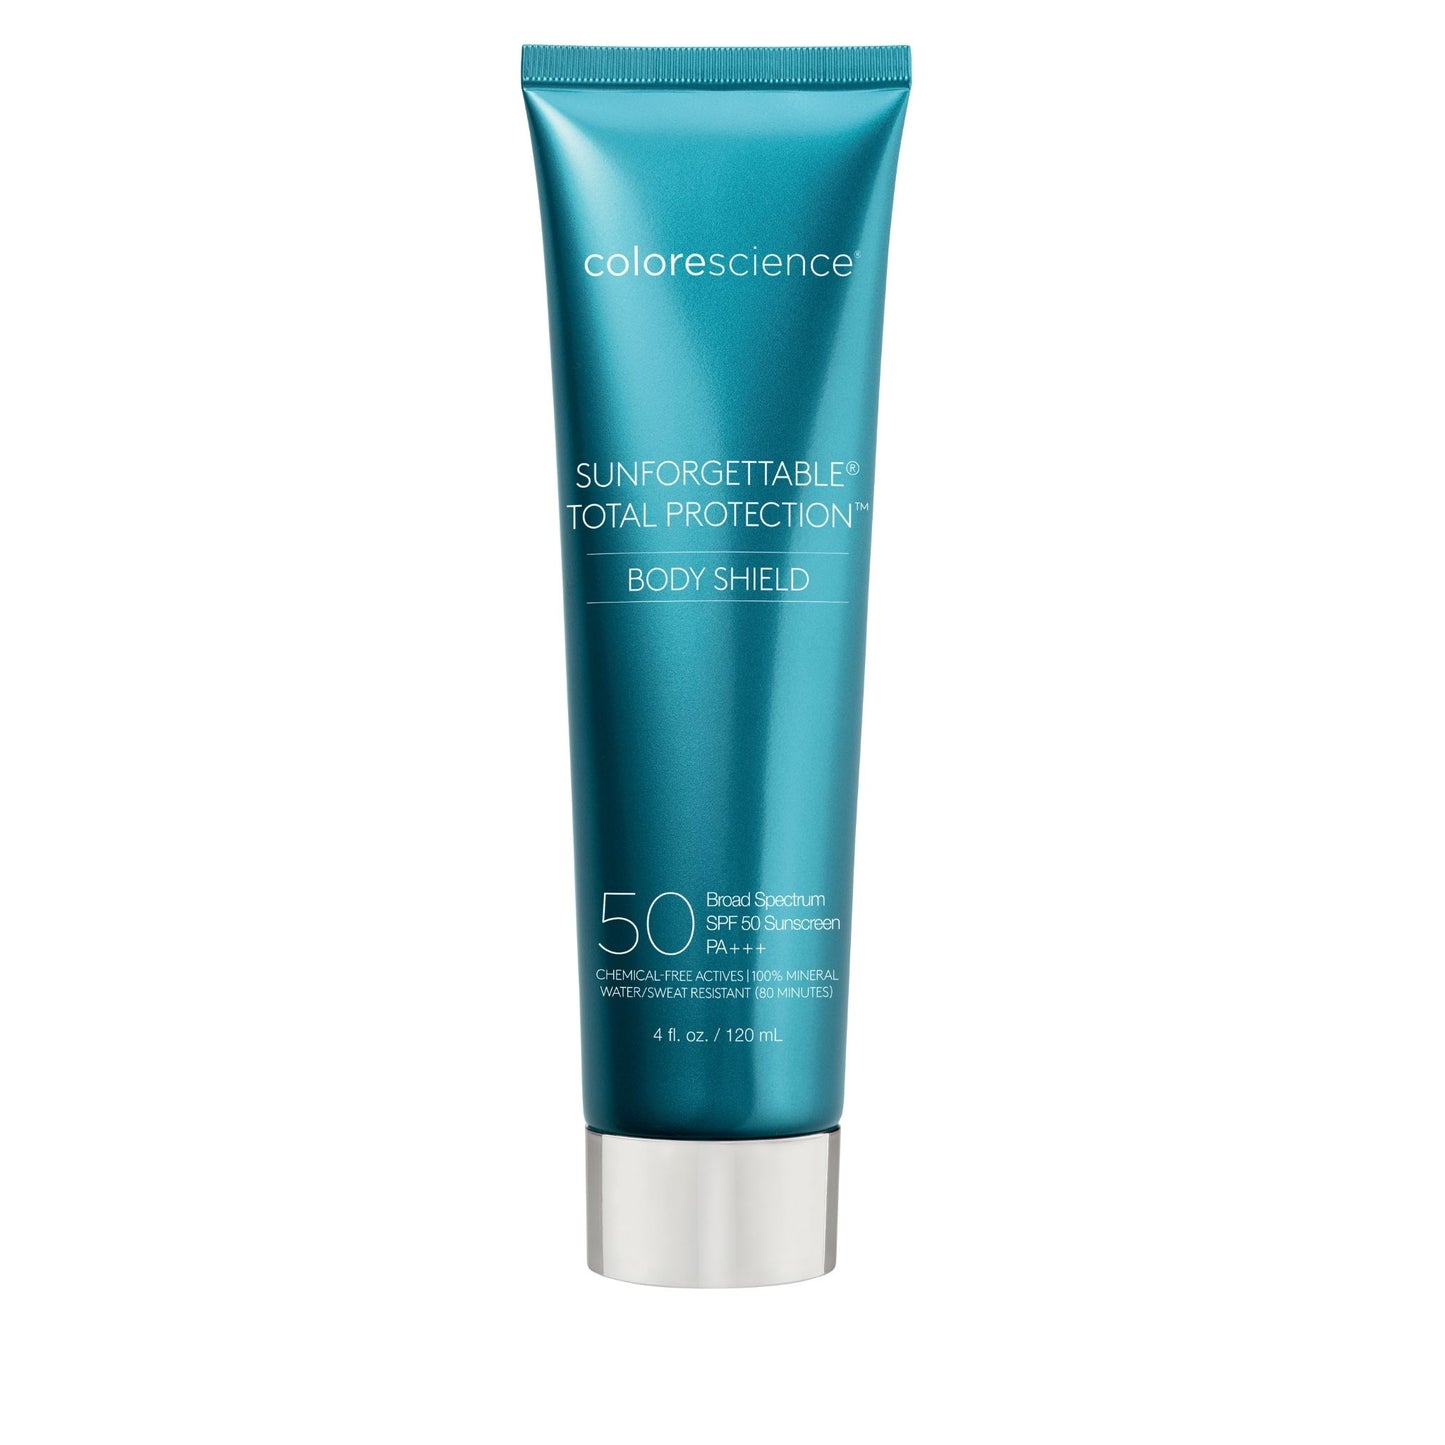 Sunforgettable® Total Protection Body Shield Classic SPF 50